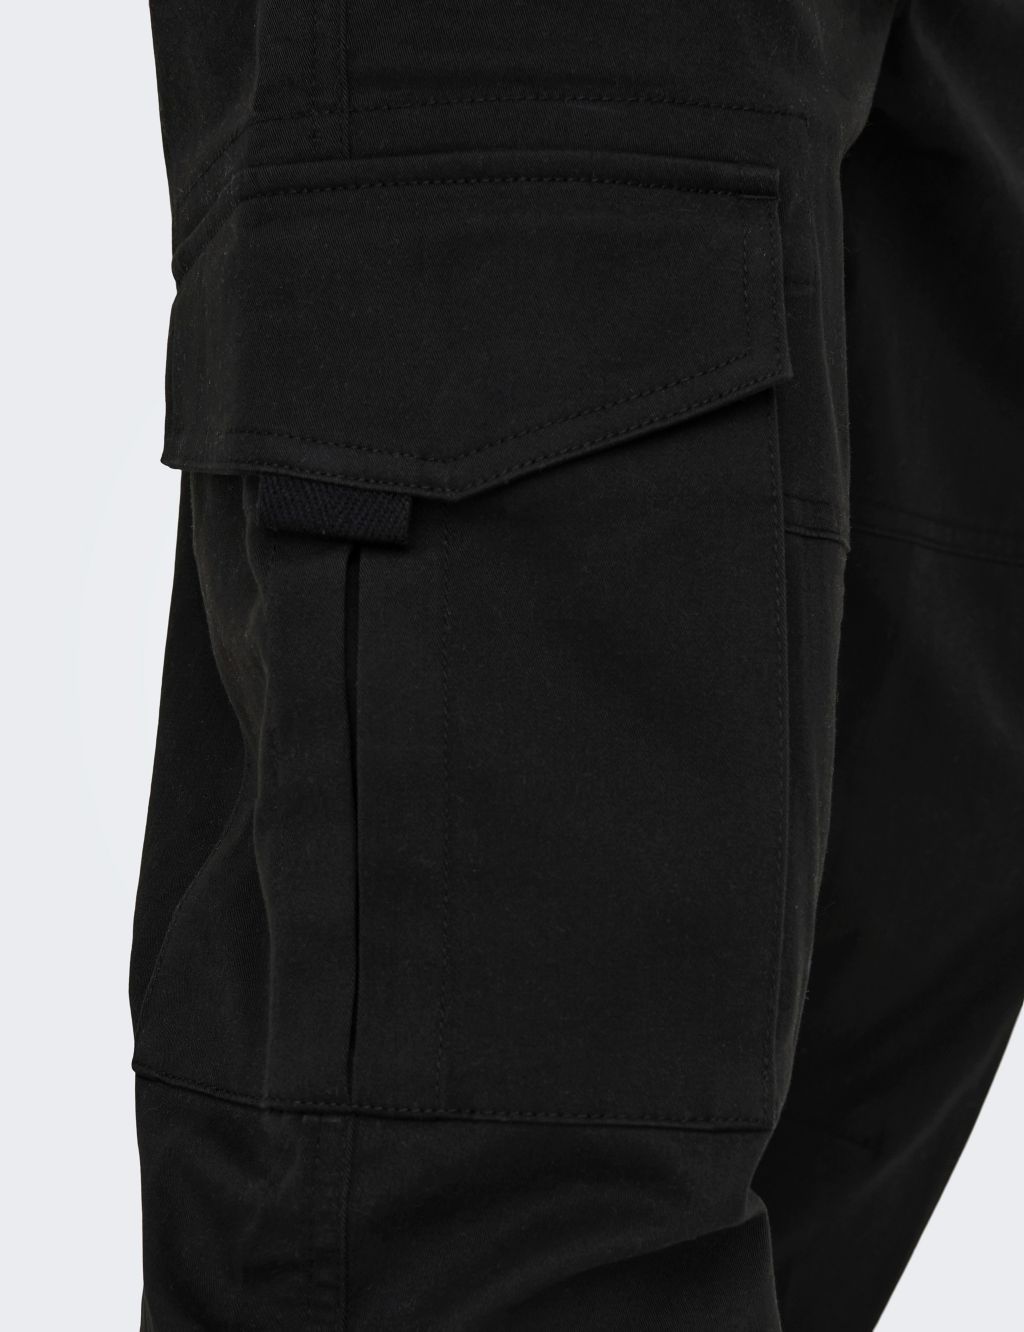 Only & Sons Black Slim Fit Cargo Trousers